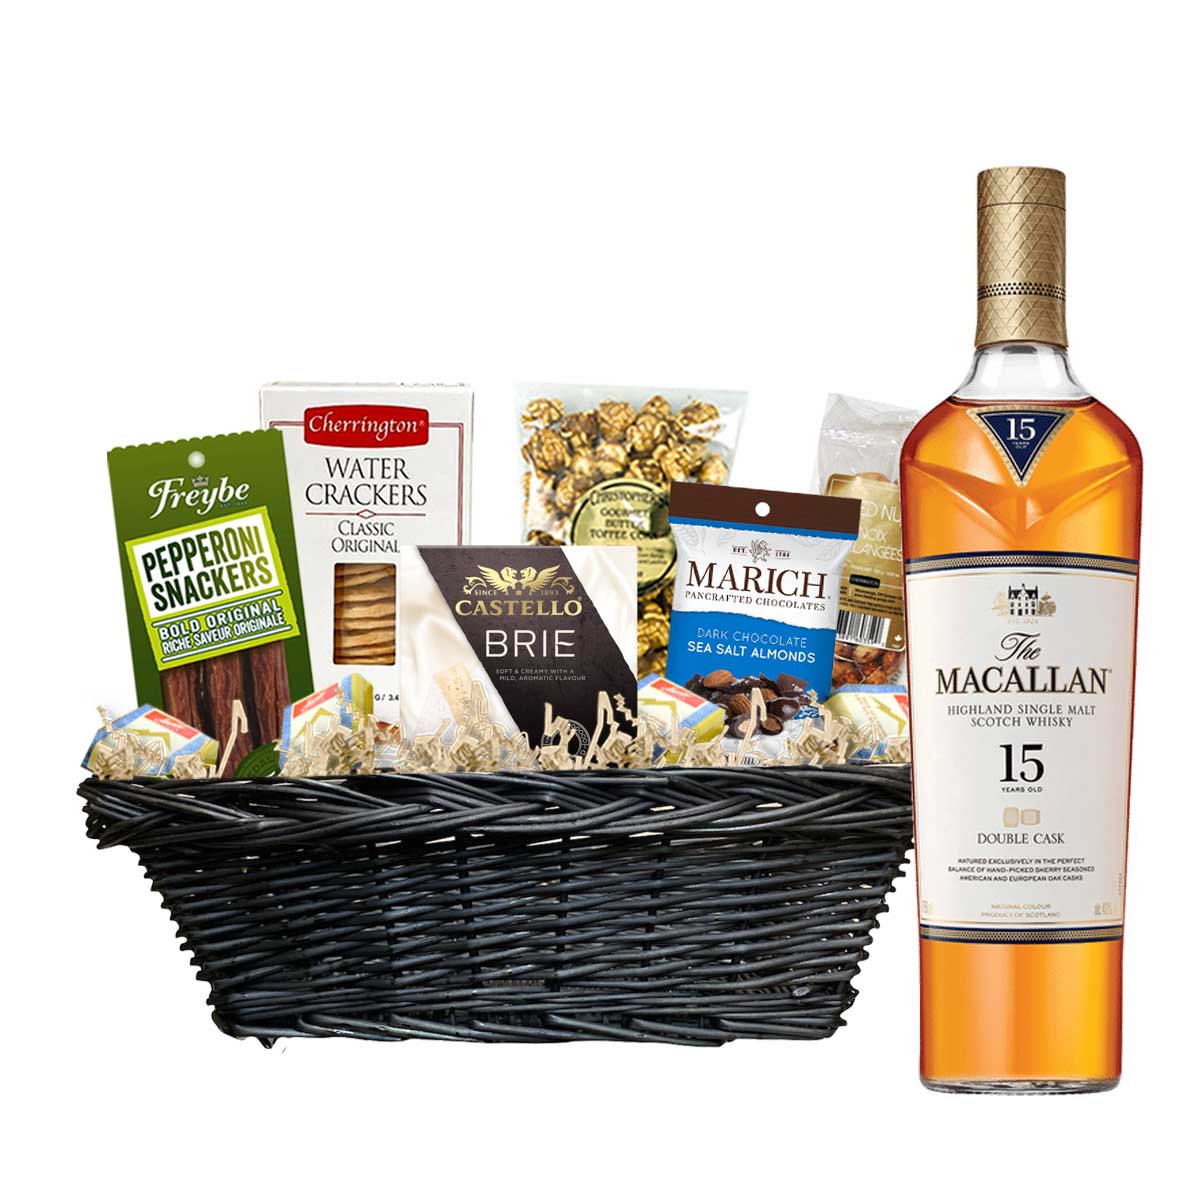 TAG Liquor Stores Canada Delivery-Macallan 15 Year Scotch 750ml Corporate Gift Basket-spirits-tagliquorstores.com